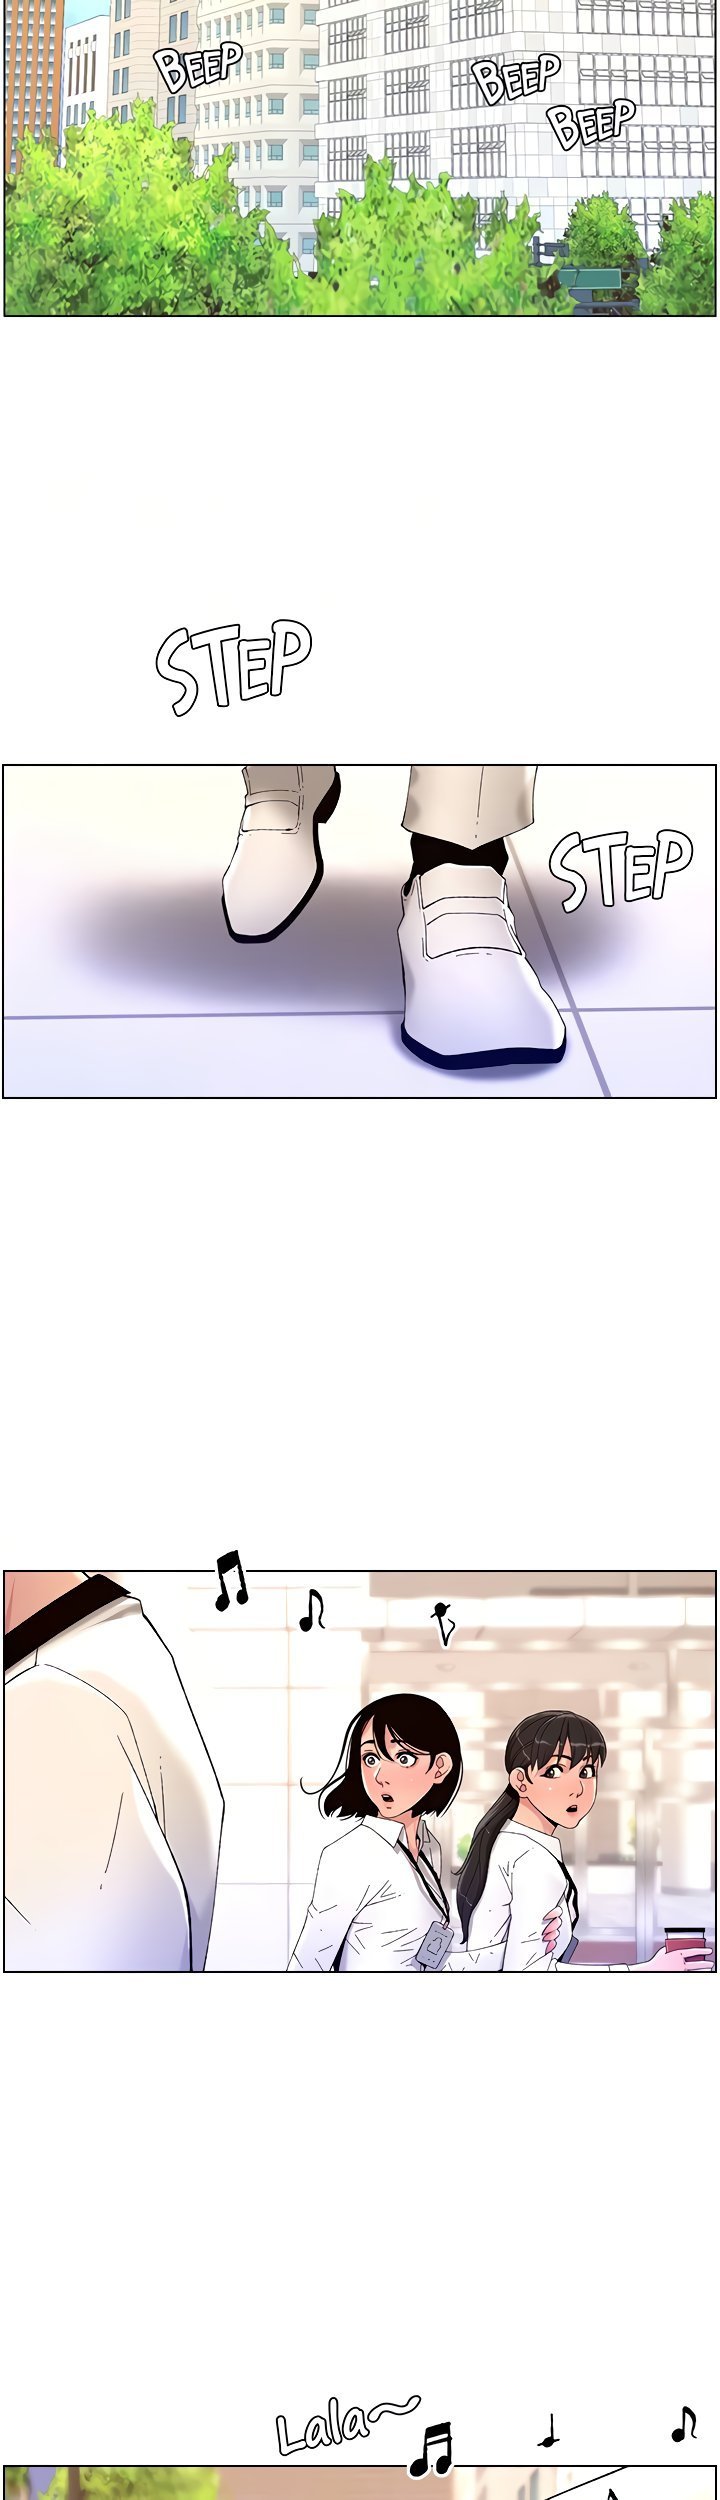 app-for-the-emperor-of-the-night-chap-31-37